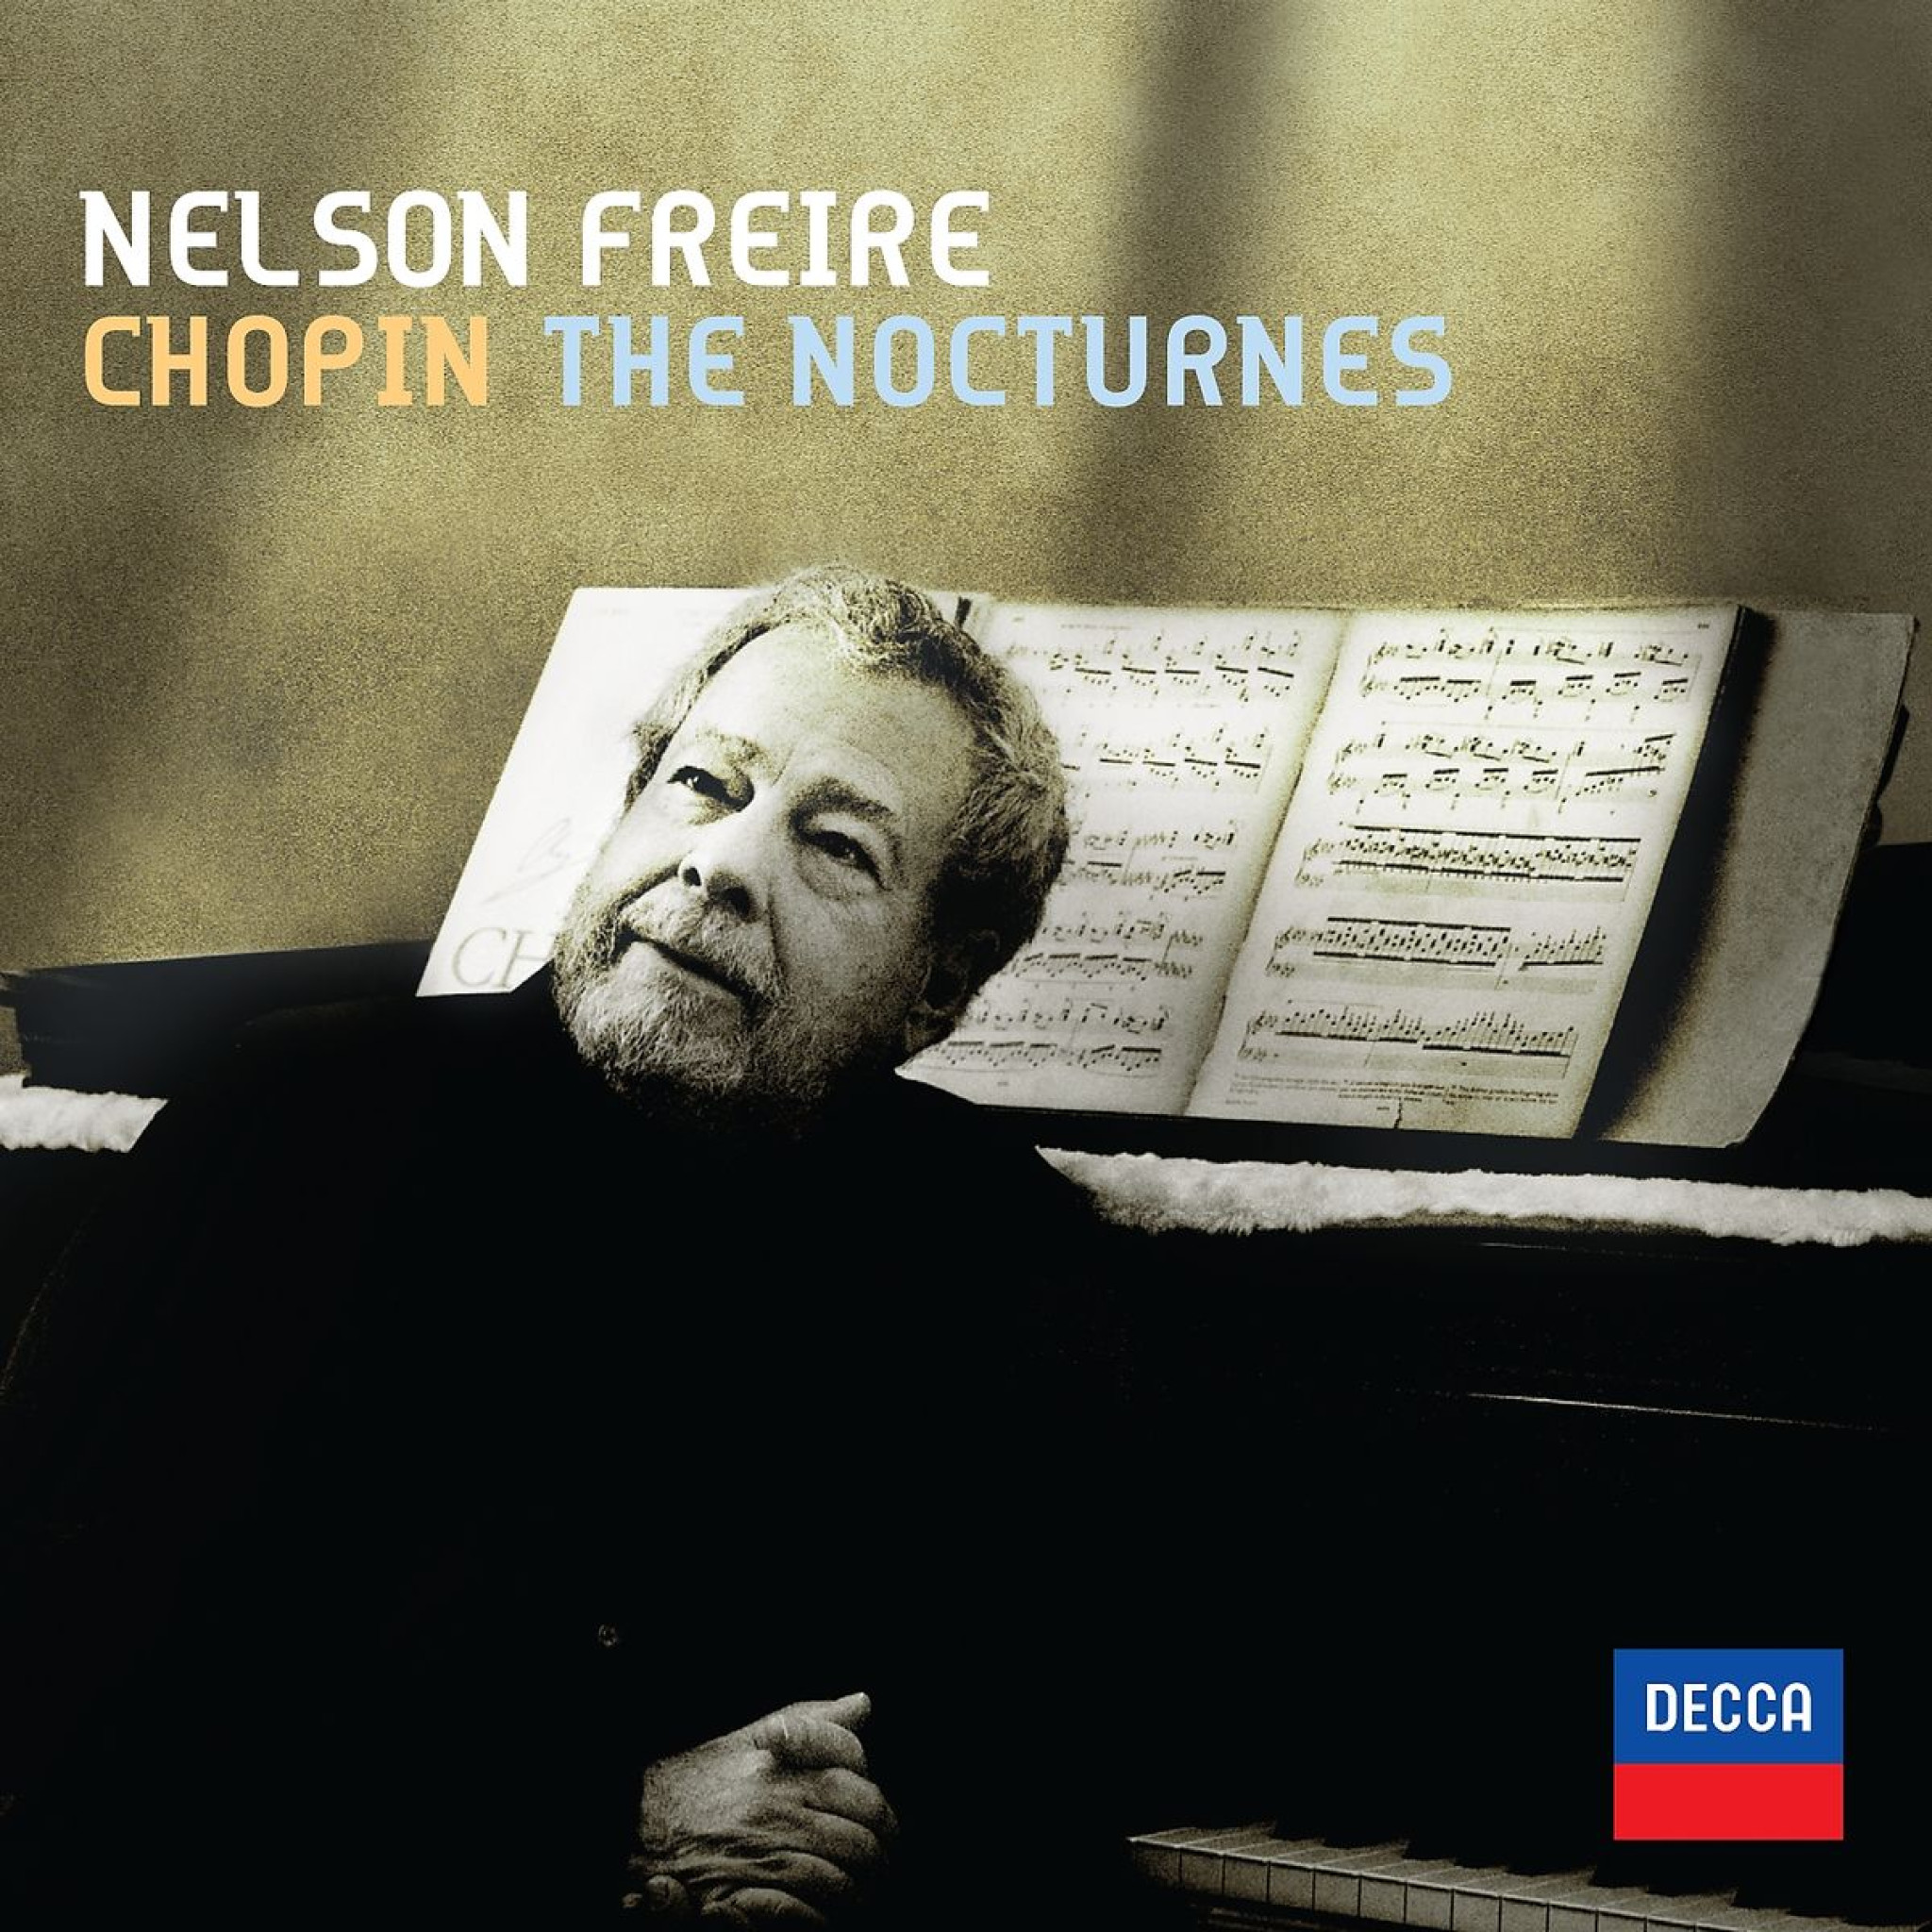 Chopin: Nocturnes: Freire,Nelson